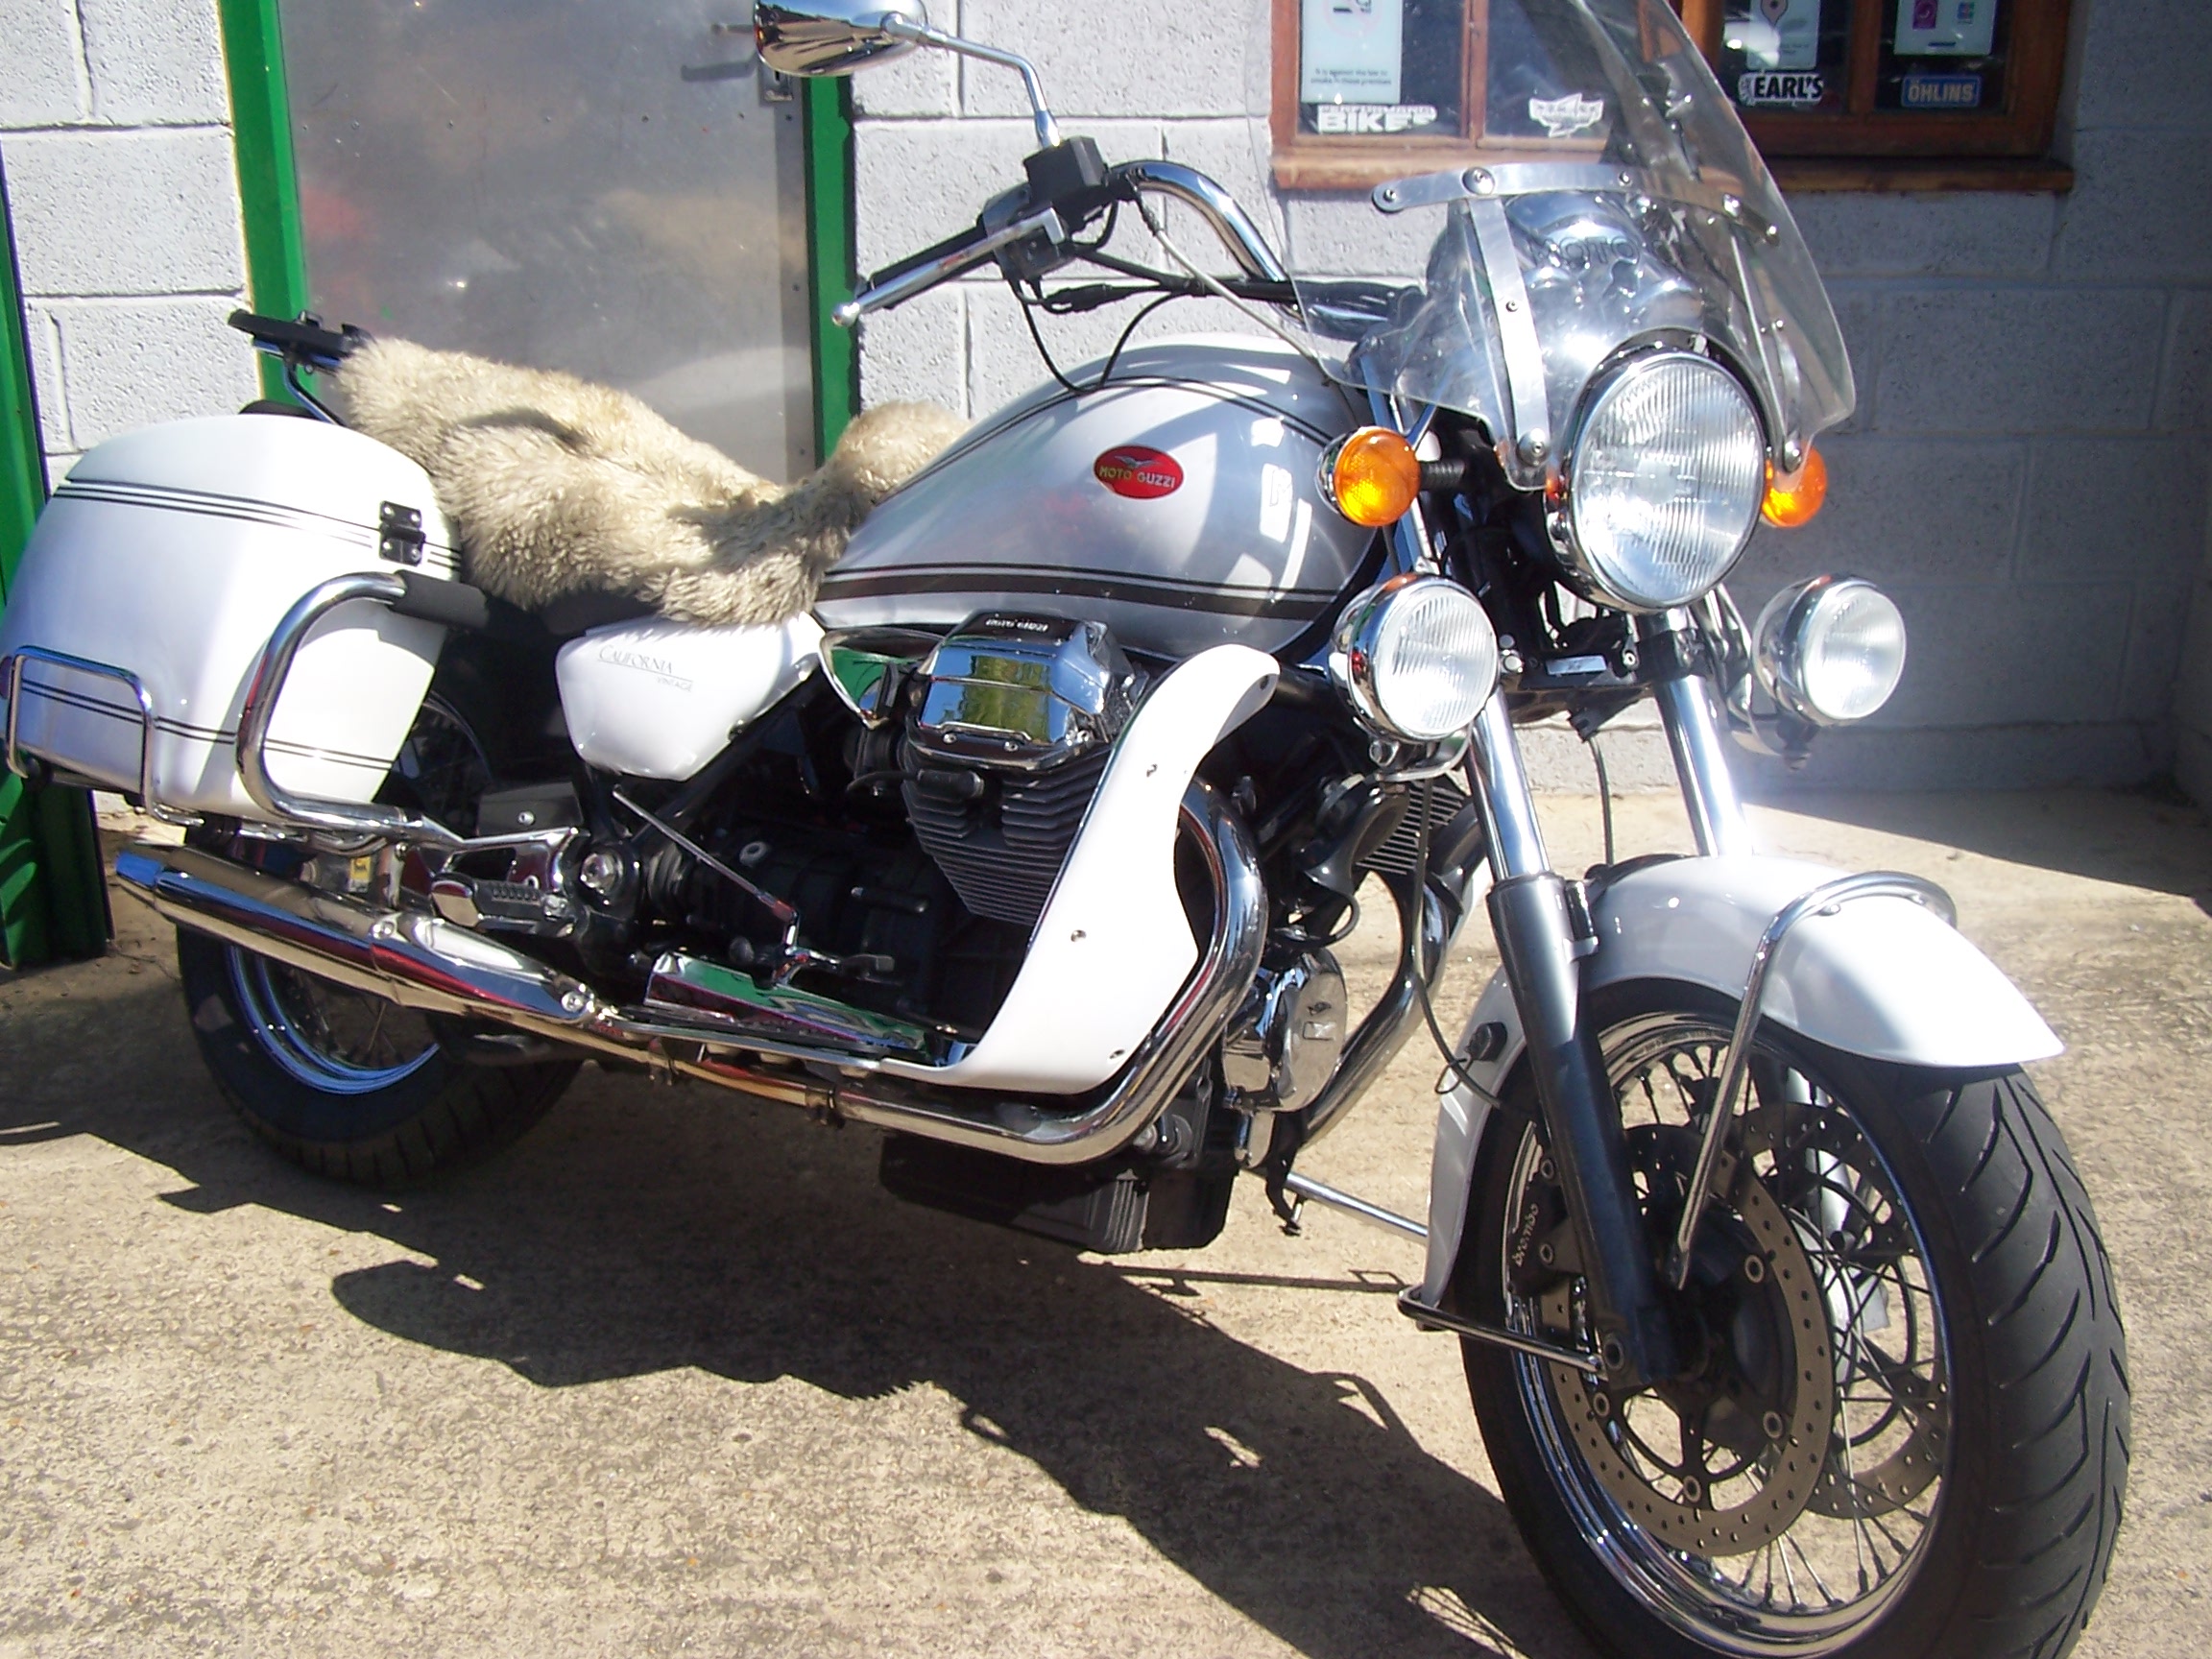 Moto Guzzi 1100 California ECU remap – an owner emails his thoughts